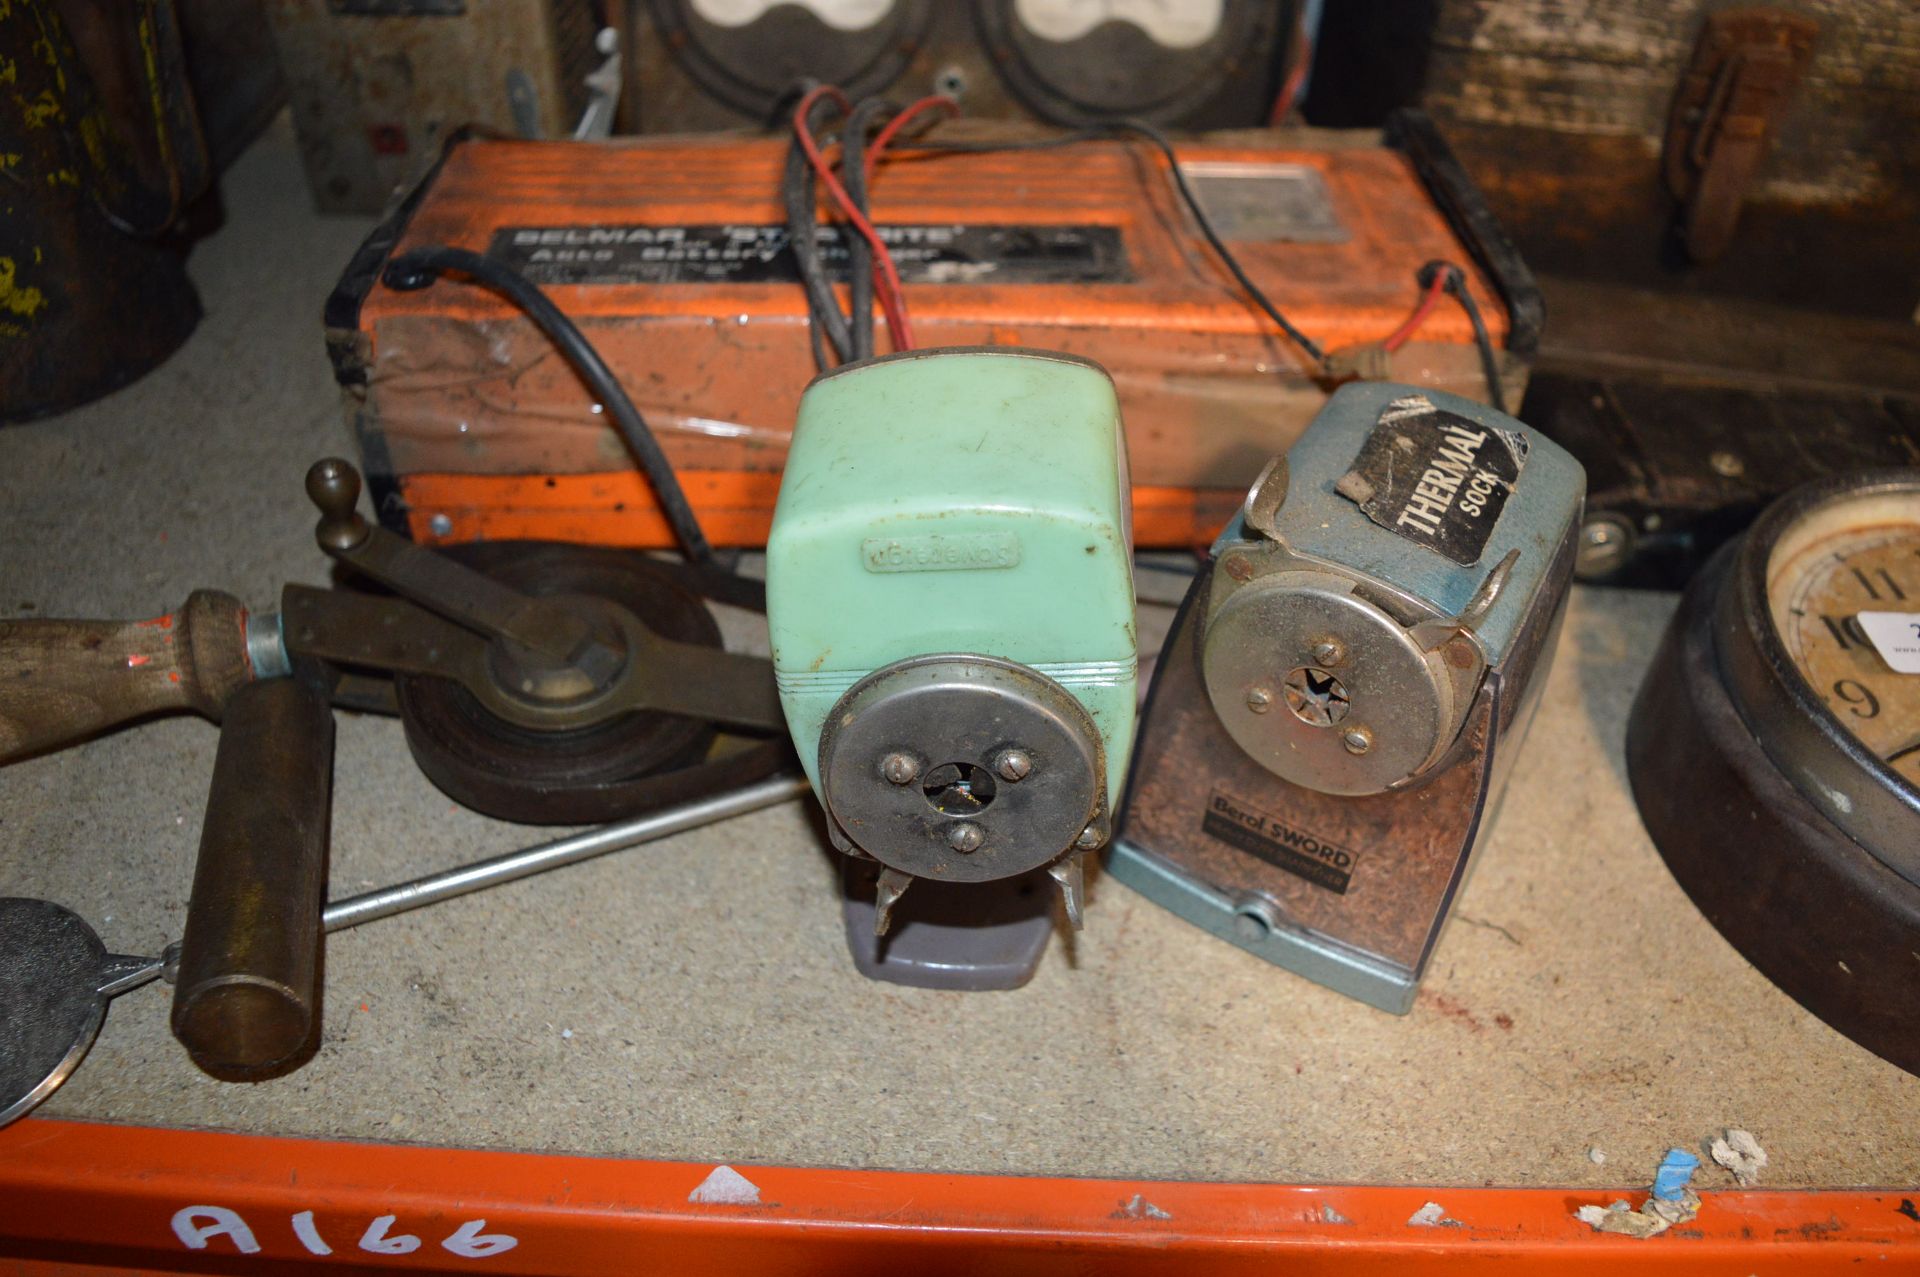 Mixed Lot Including Auto Battery Charger, Pencil Sharpeners, Cameras, Brake Testing Meters, etc. - Image 5 of 8